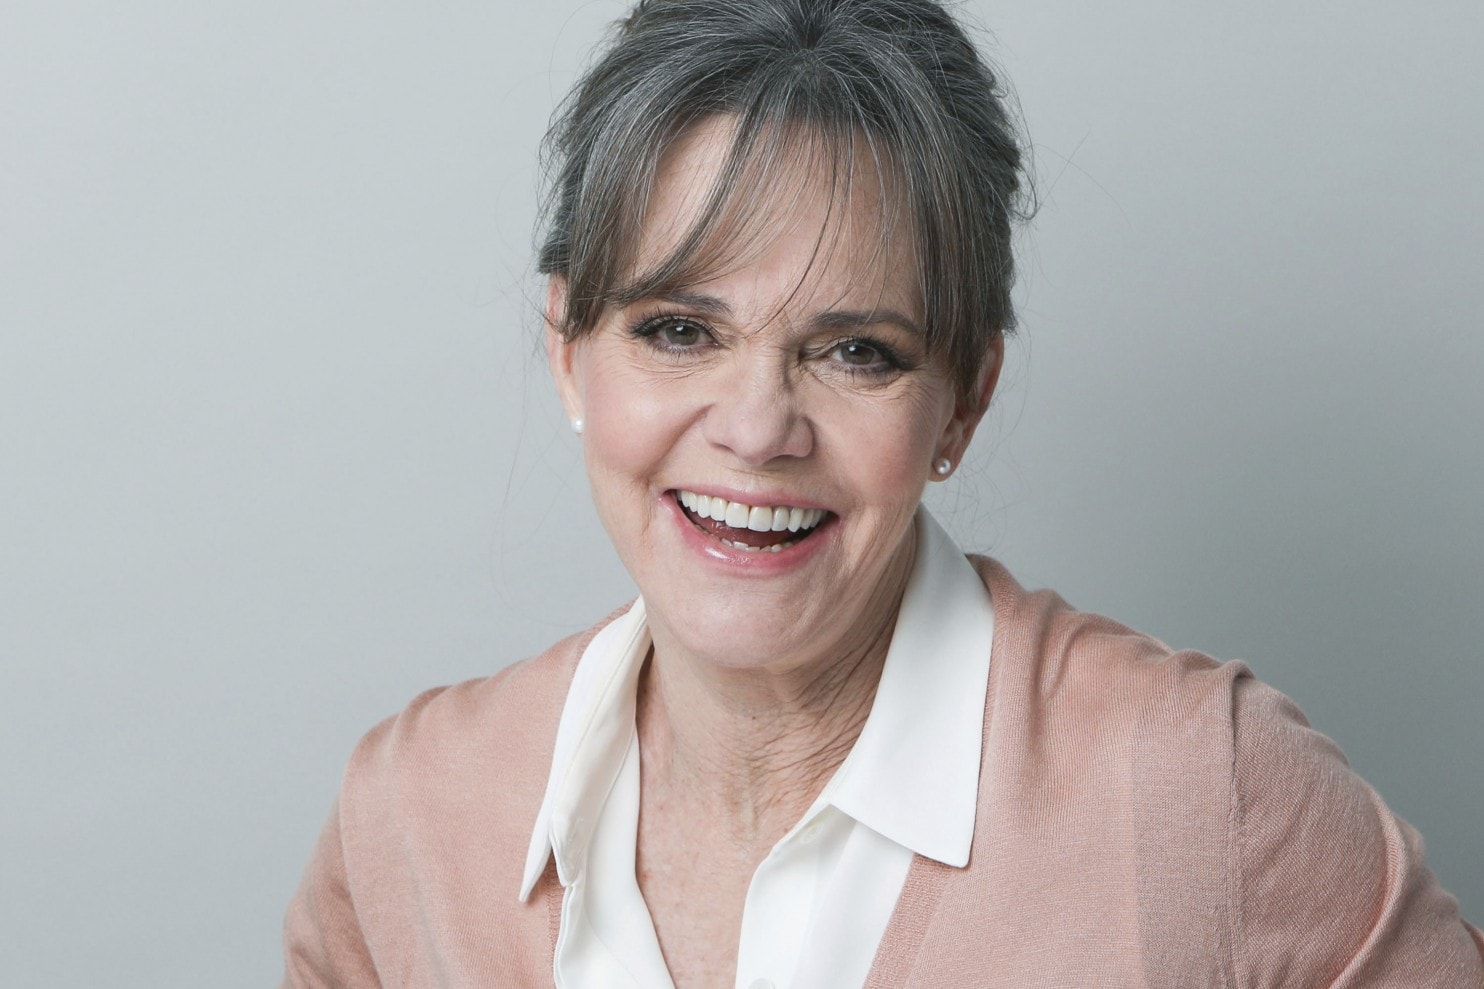 Sally Field Wiki, Bio, Age, Net Worth, and Other Facts